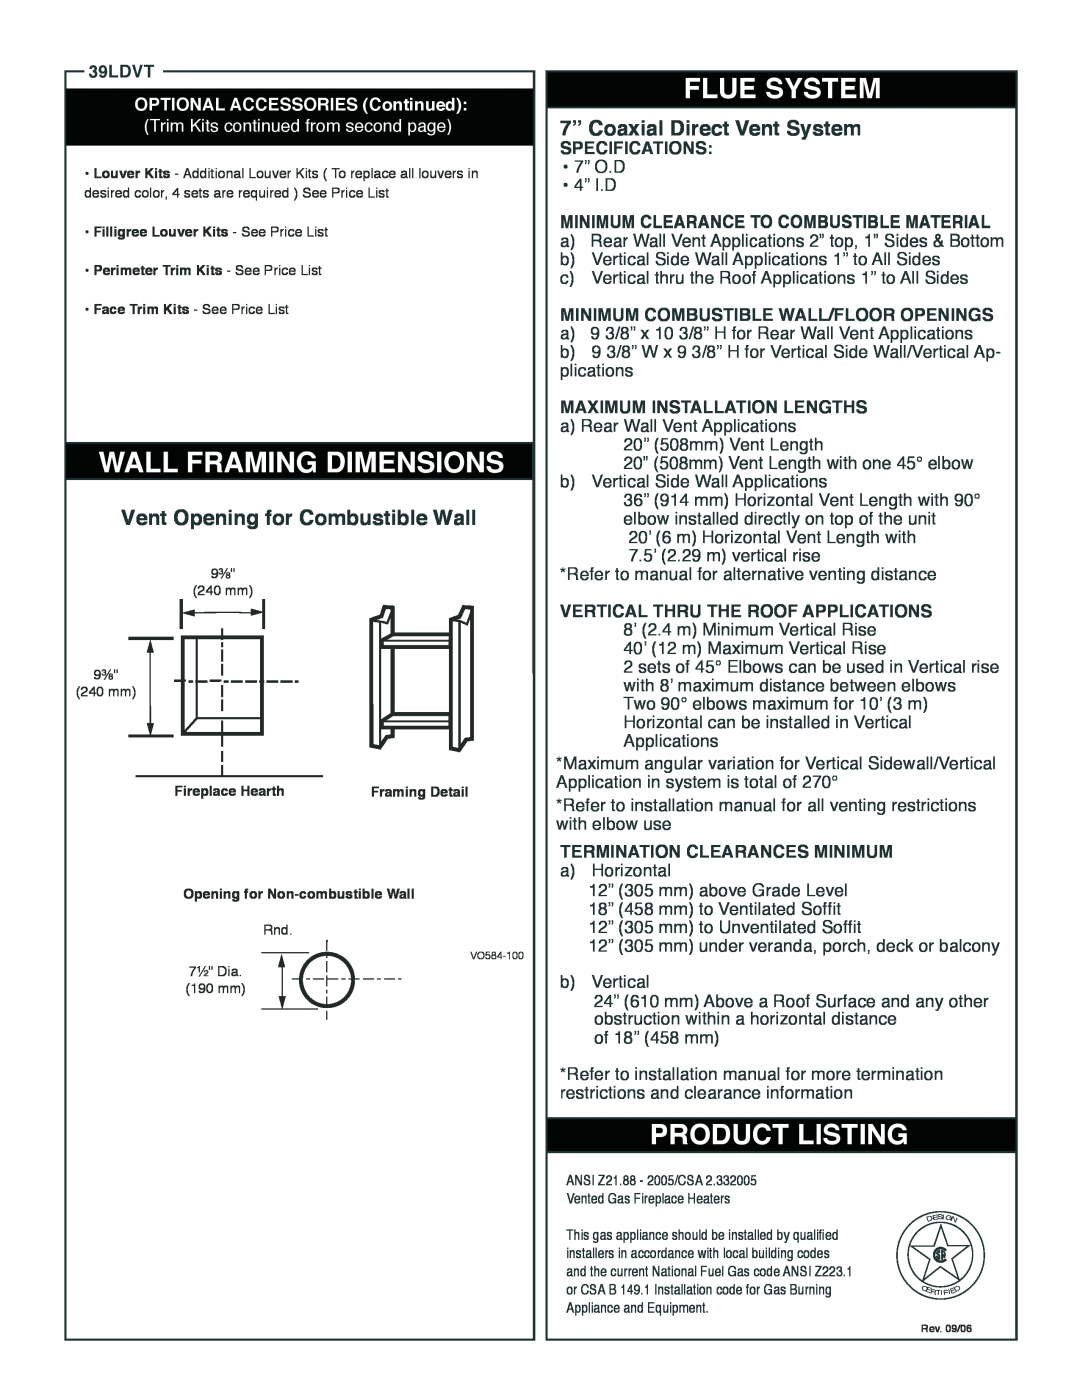 Vermont Casting 7TDVP3564 Flue System, Product Listing, 39LDVT, Specifications, Minimum Clearance To Combustible Material 